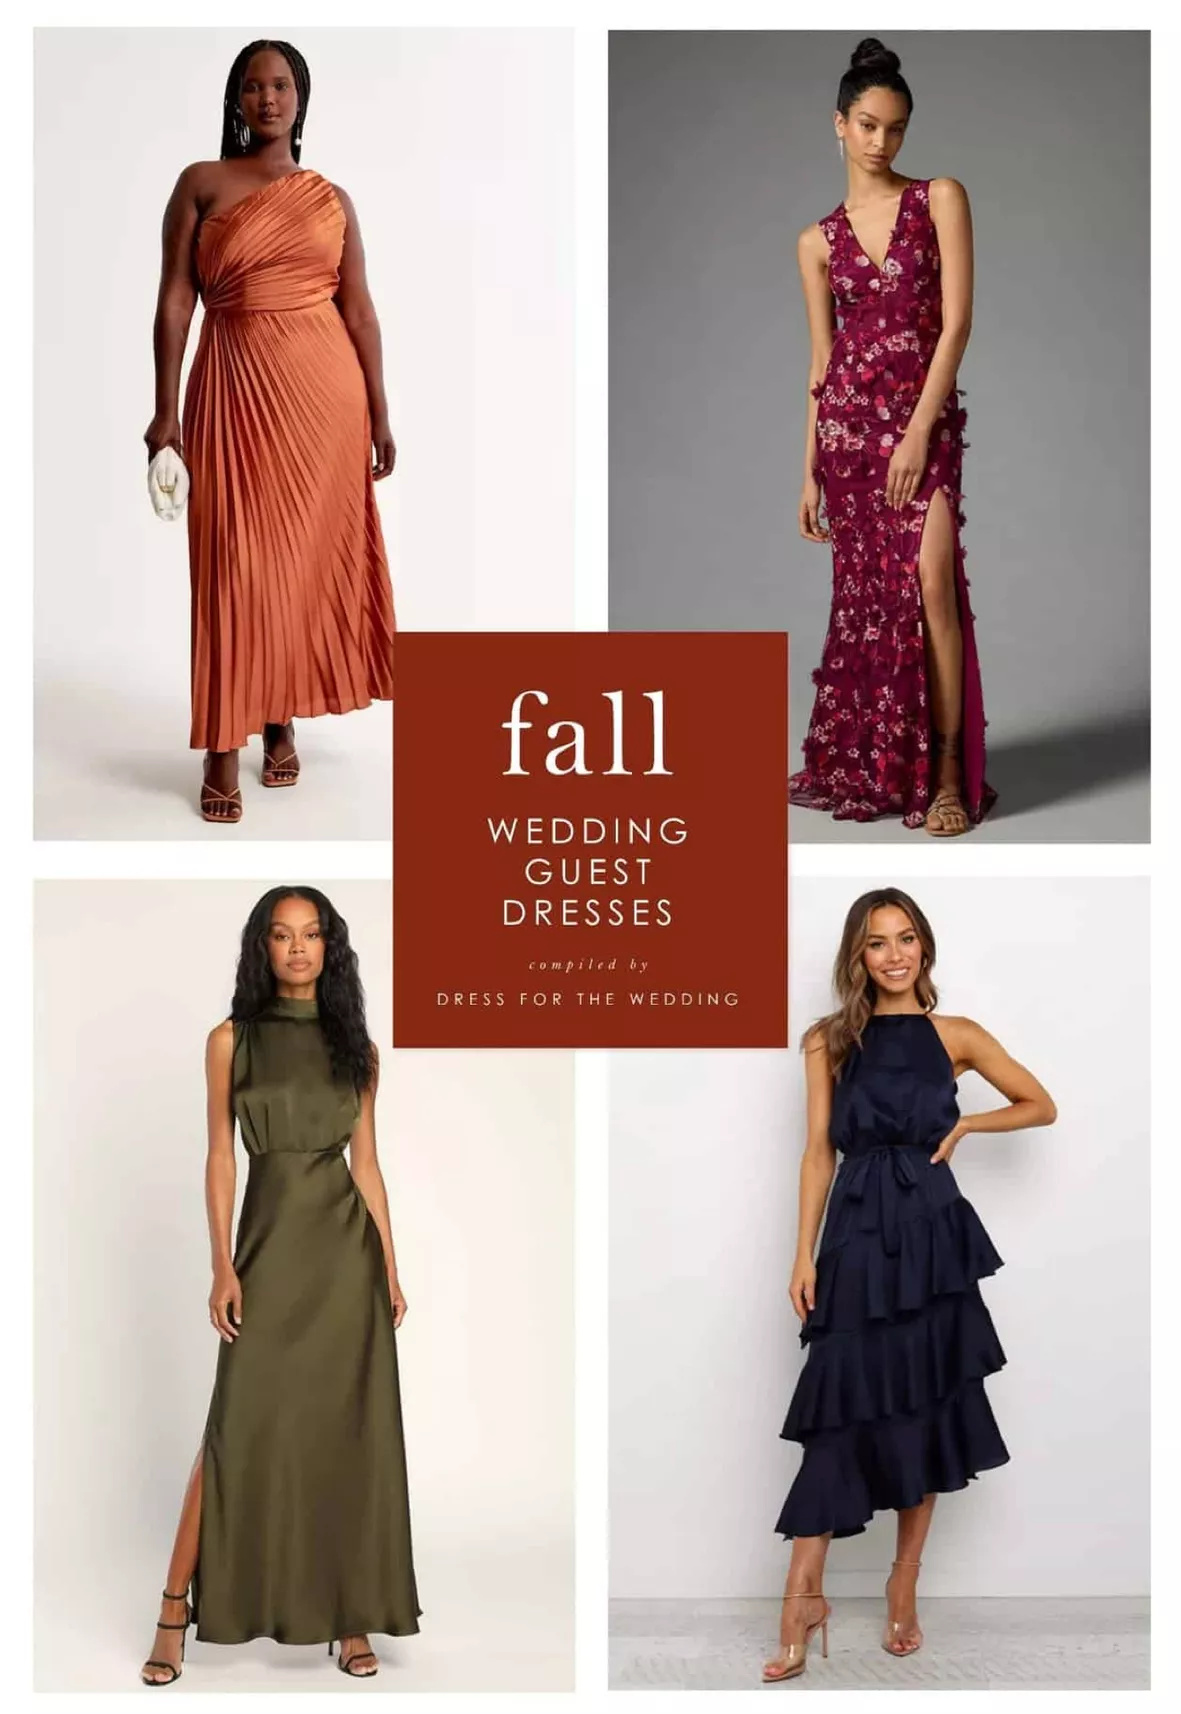 What to Wear to a Semi-Formal Fall Wedding - Dress for the Wedding